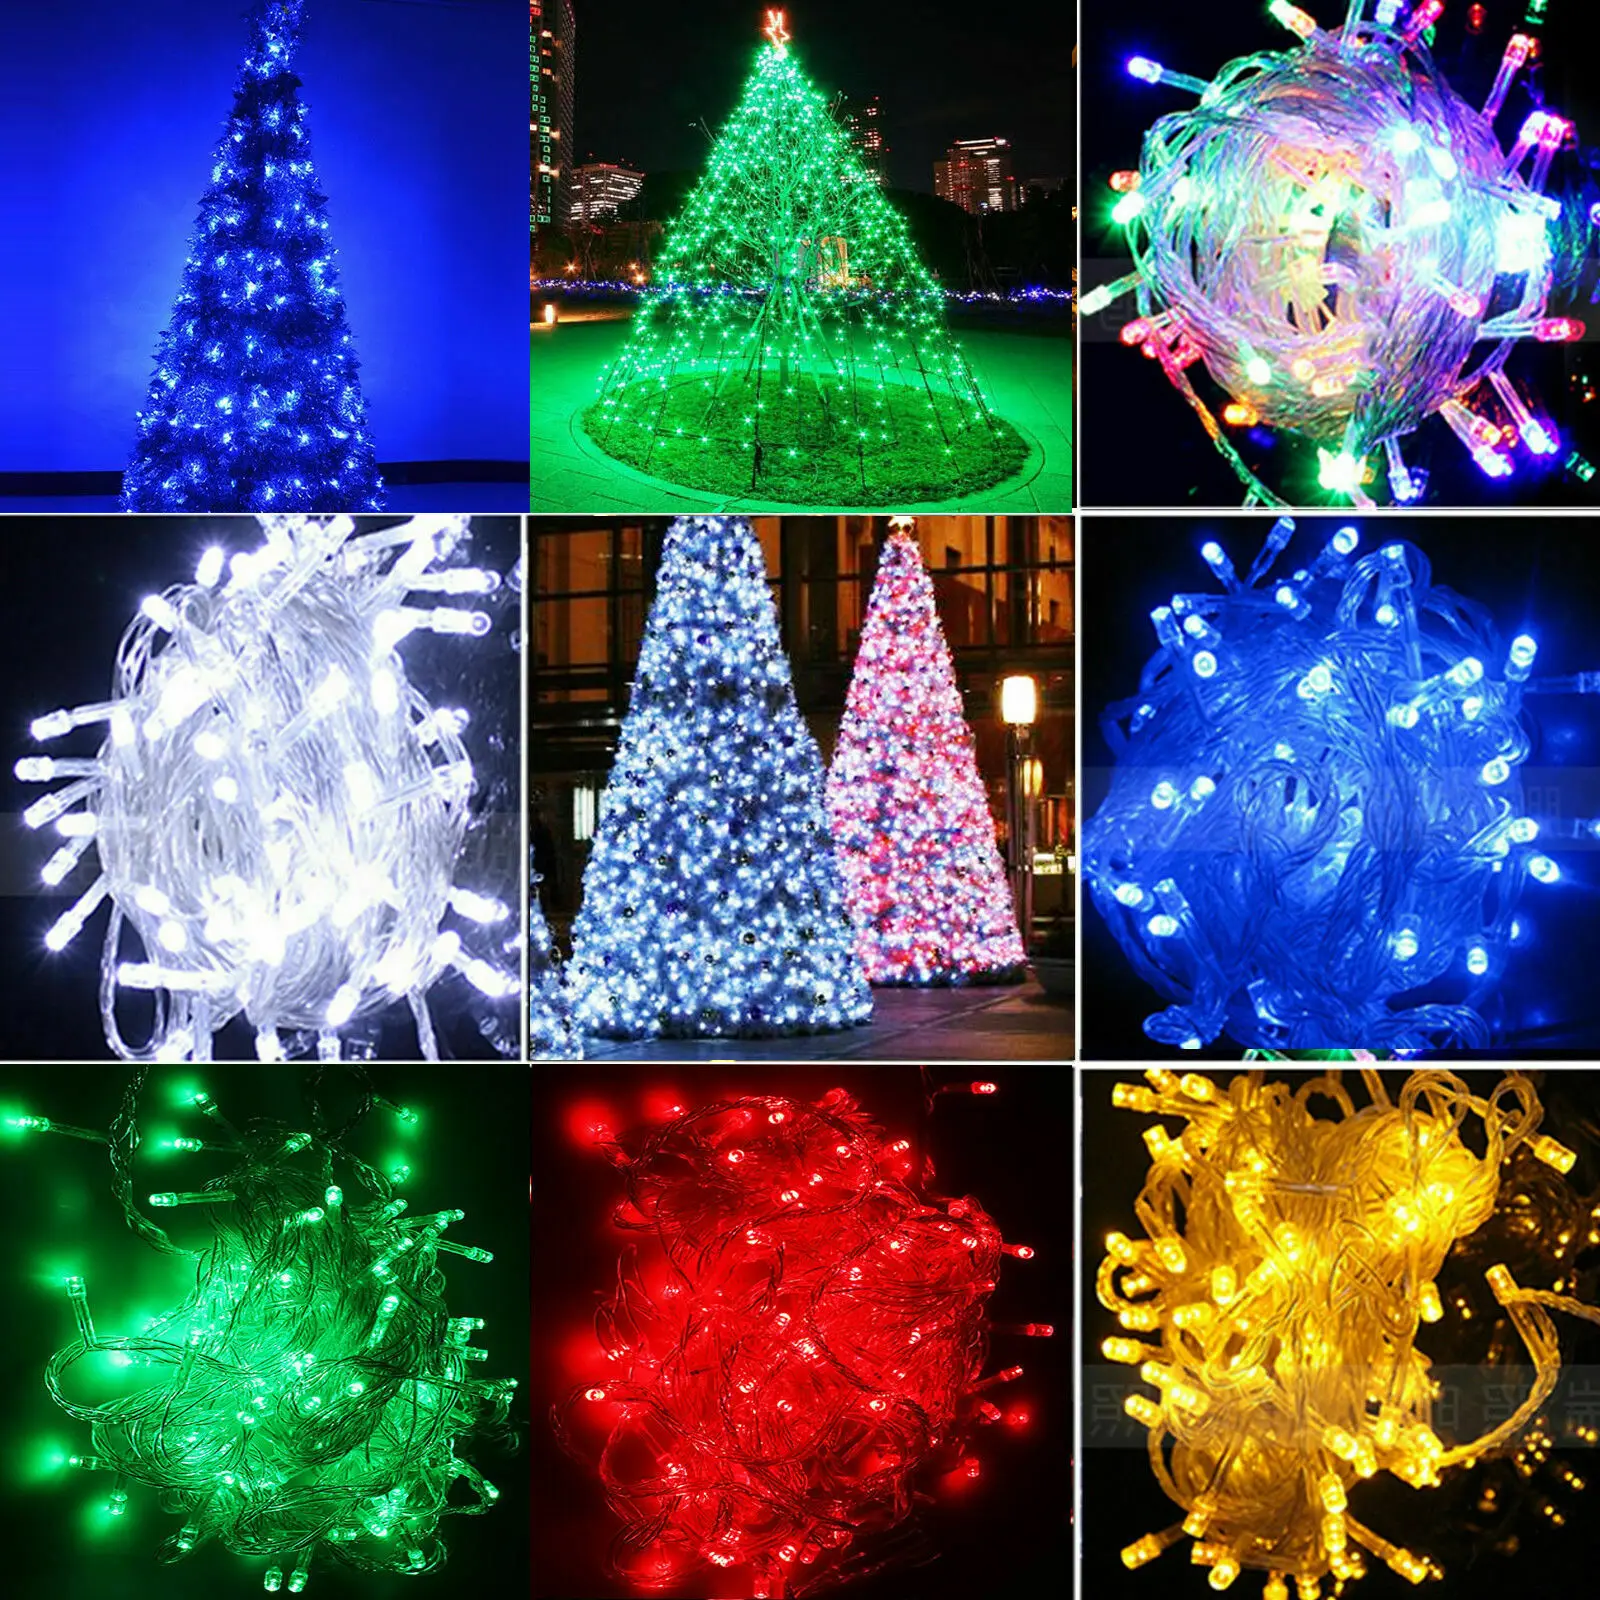 10-100 LED Christmas AA Battery Wire String Lights Wedding Party Xmas Tree Decor 